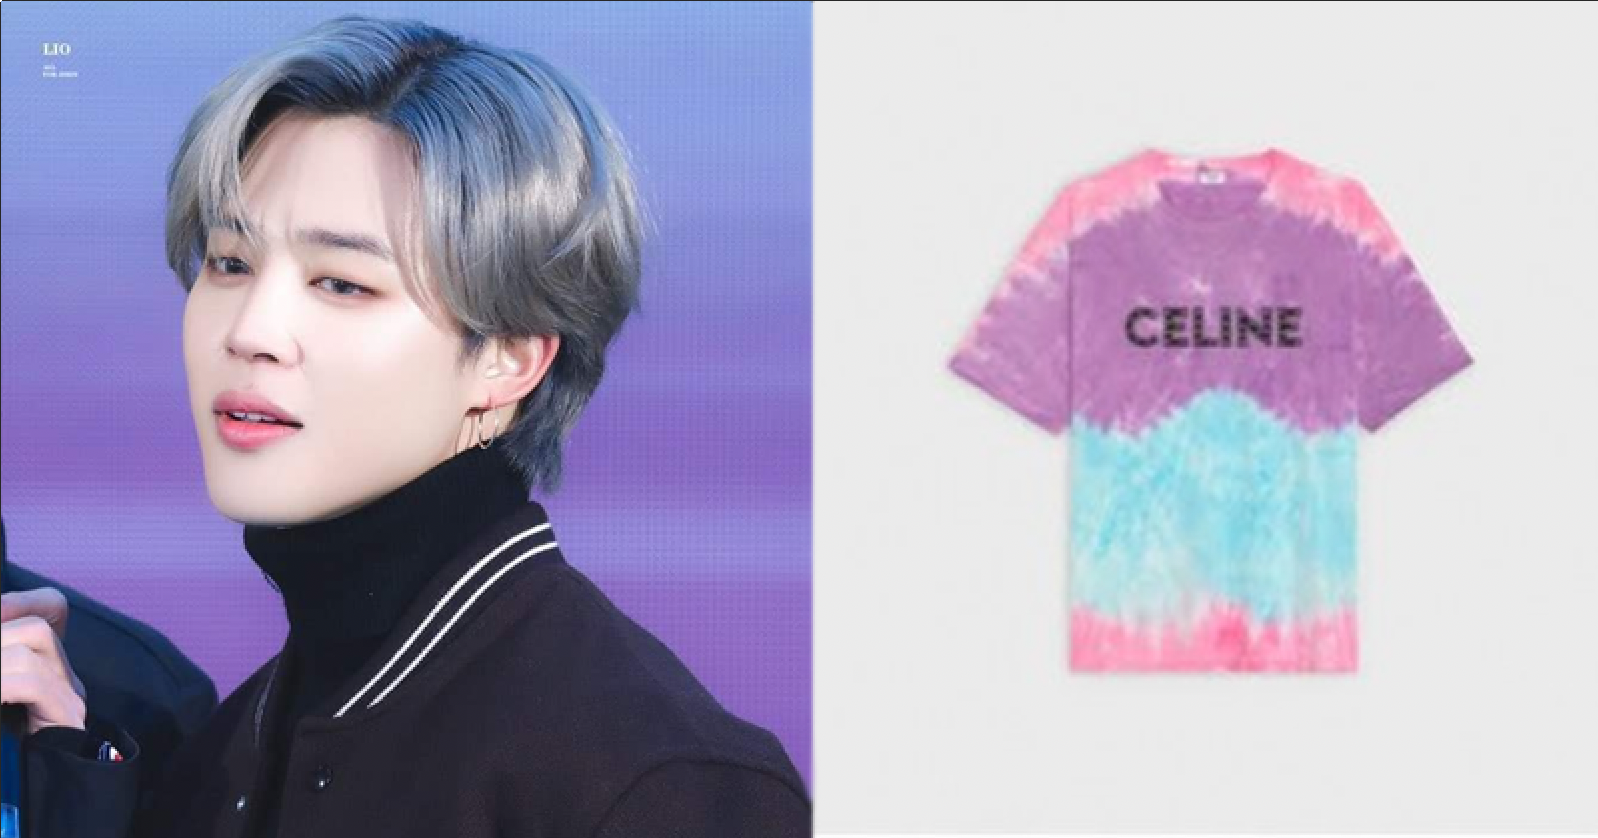 BTS Jimin Sells Out a 'CELINE' T-shirt Across the Globe after '2022 BTS Season's Greetings' Preview